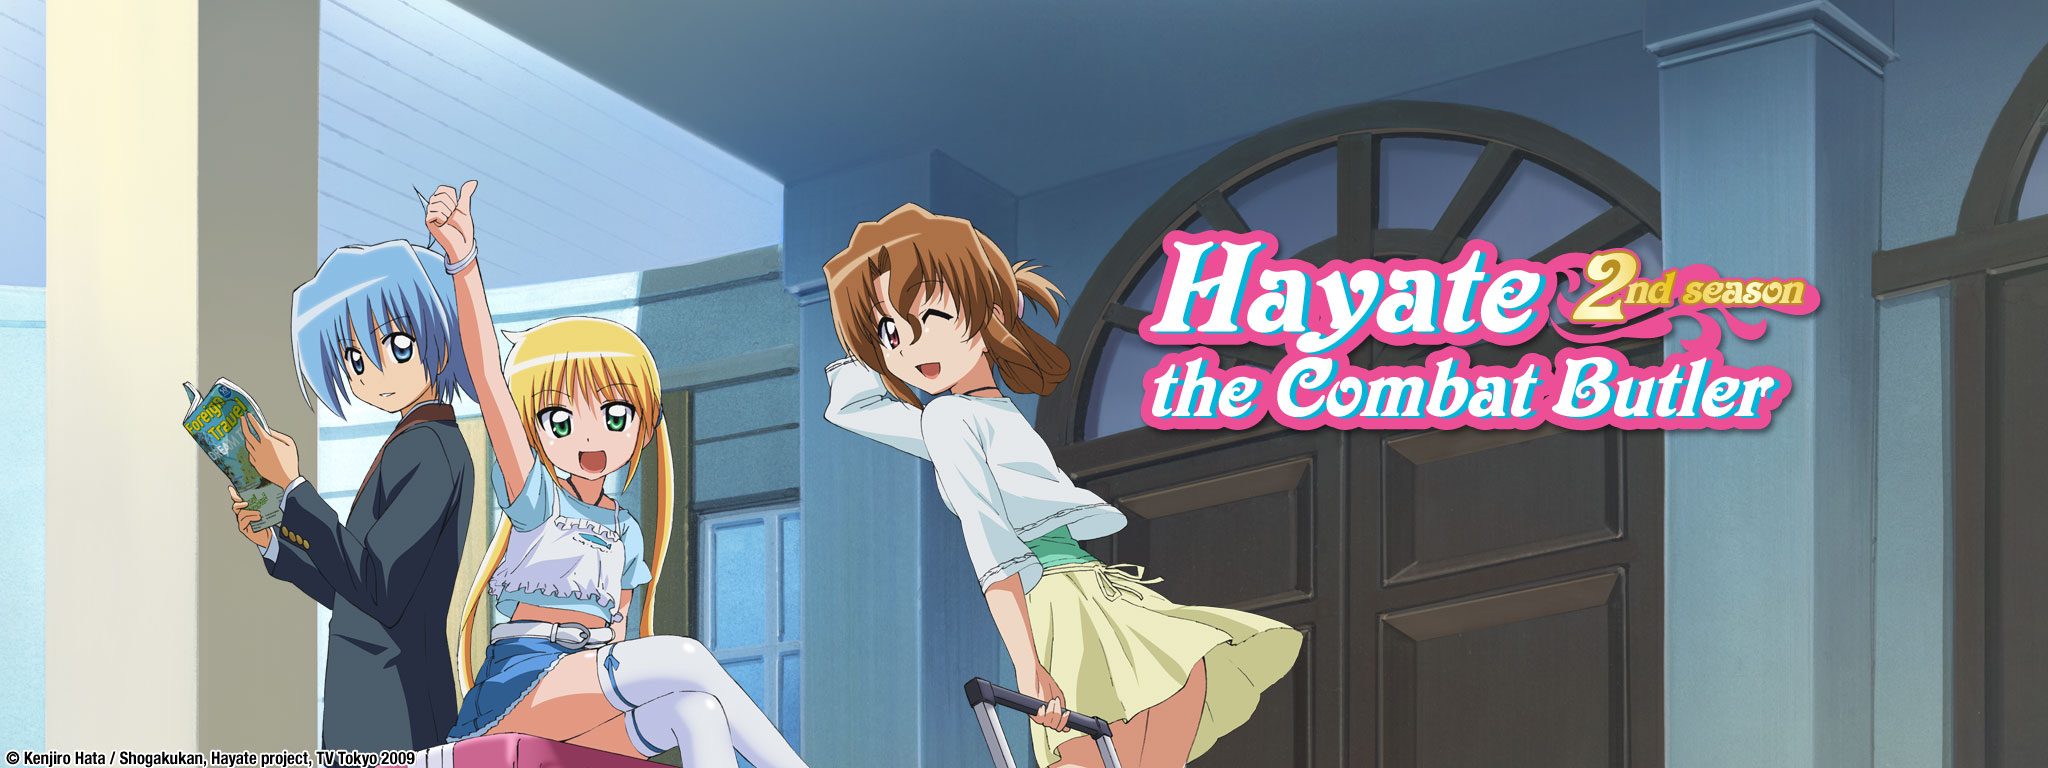 Title Art for Hayate the Combat Butler 2nd Season